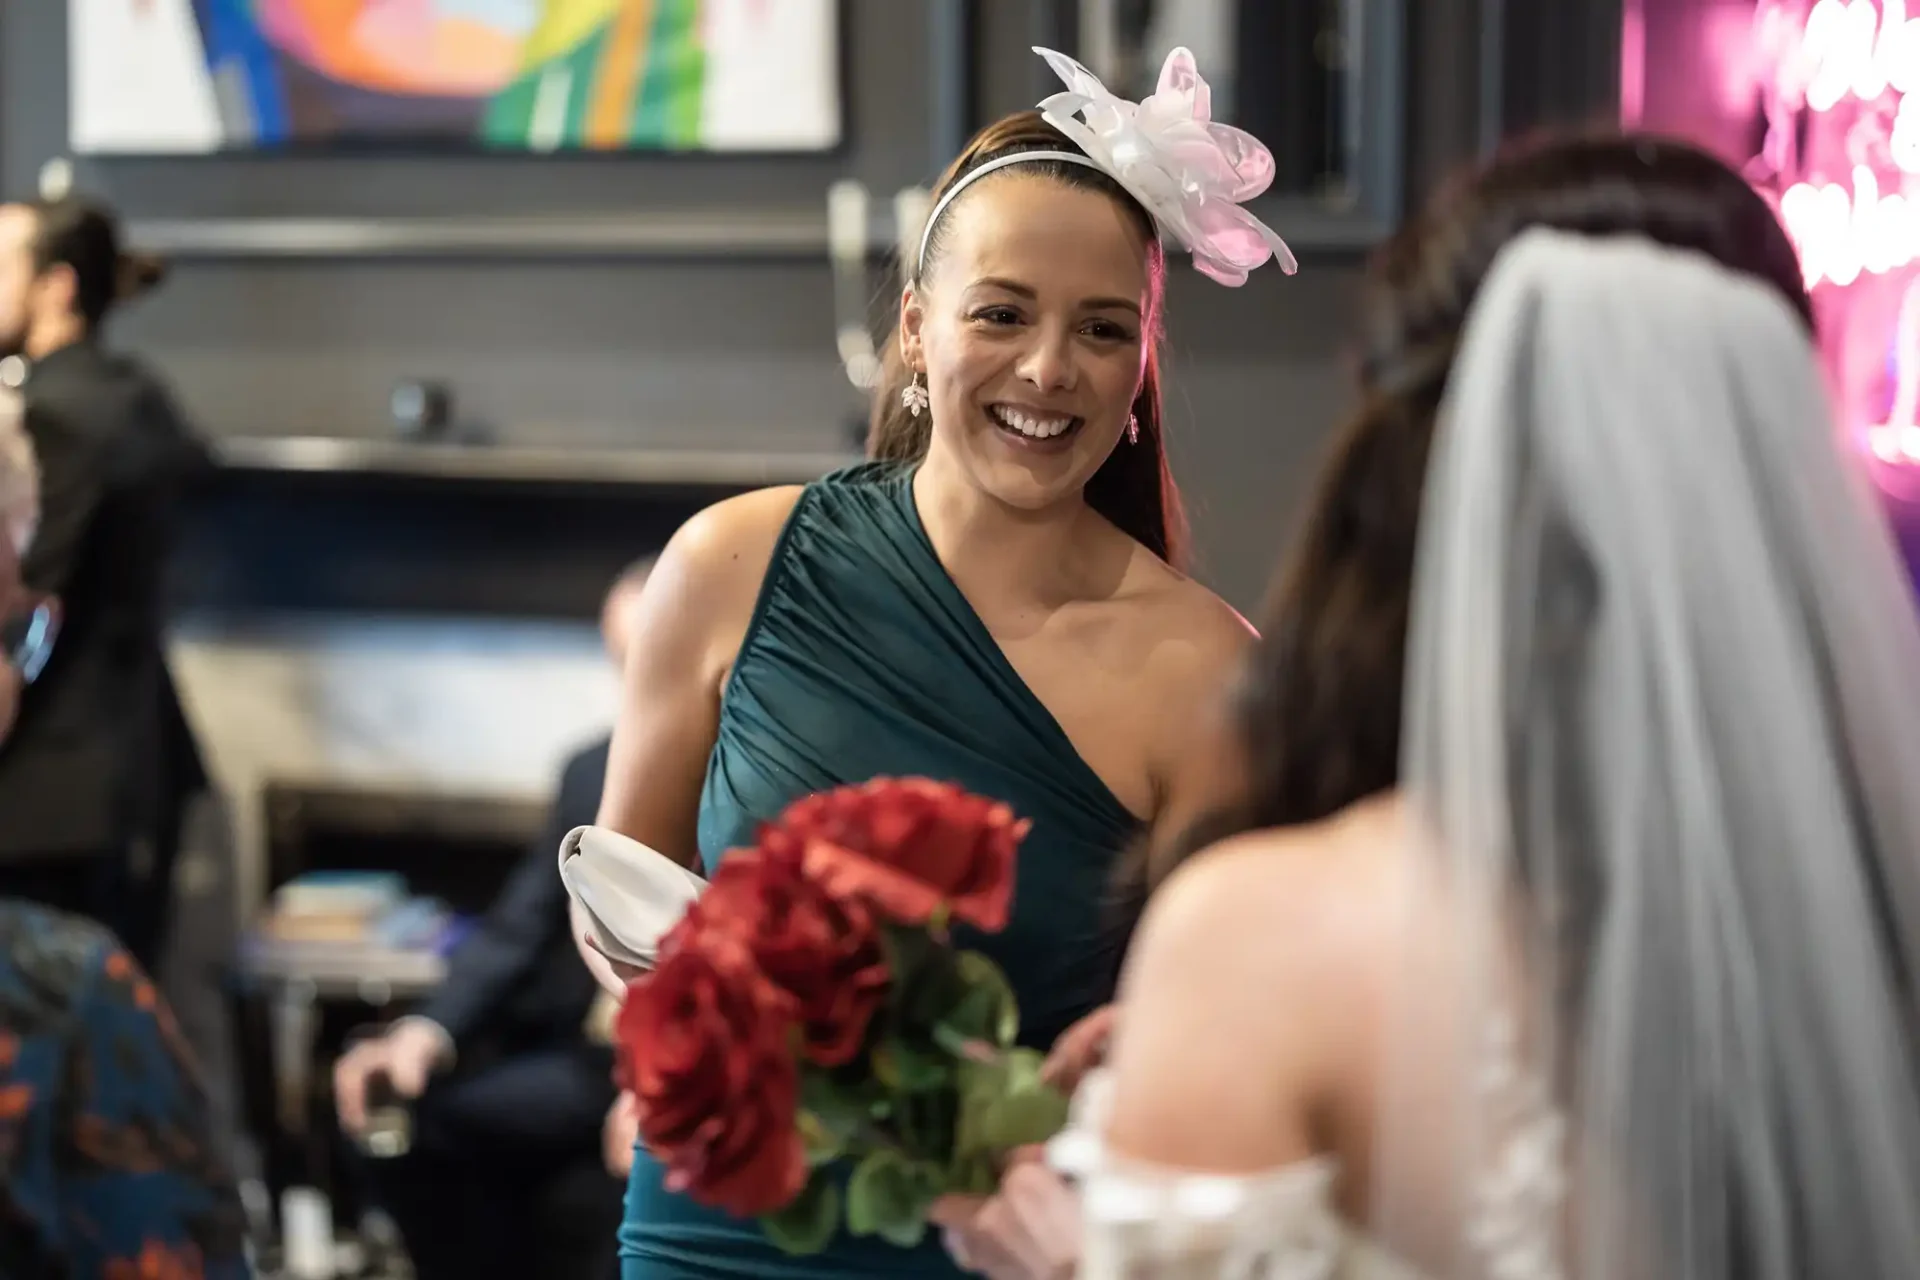 A bridesmaid in a teal dress and fascinator smiles as she holds a bouquet of red roses, talking to a bride in a white dress.